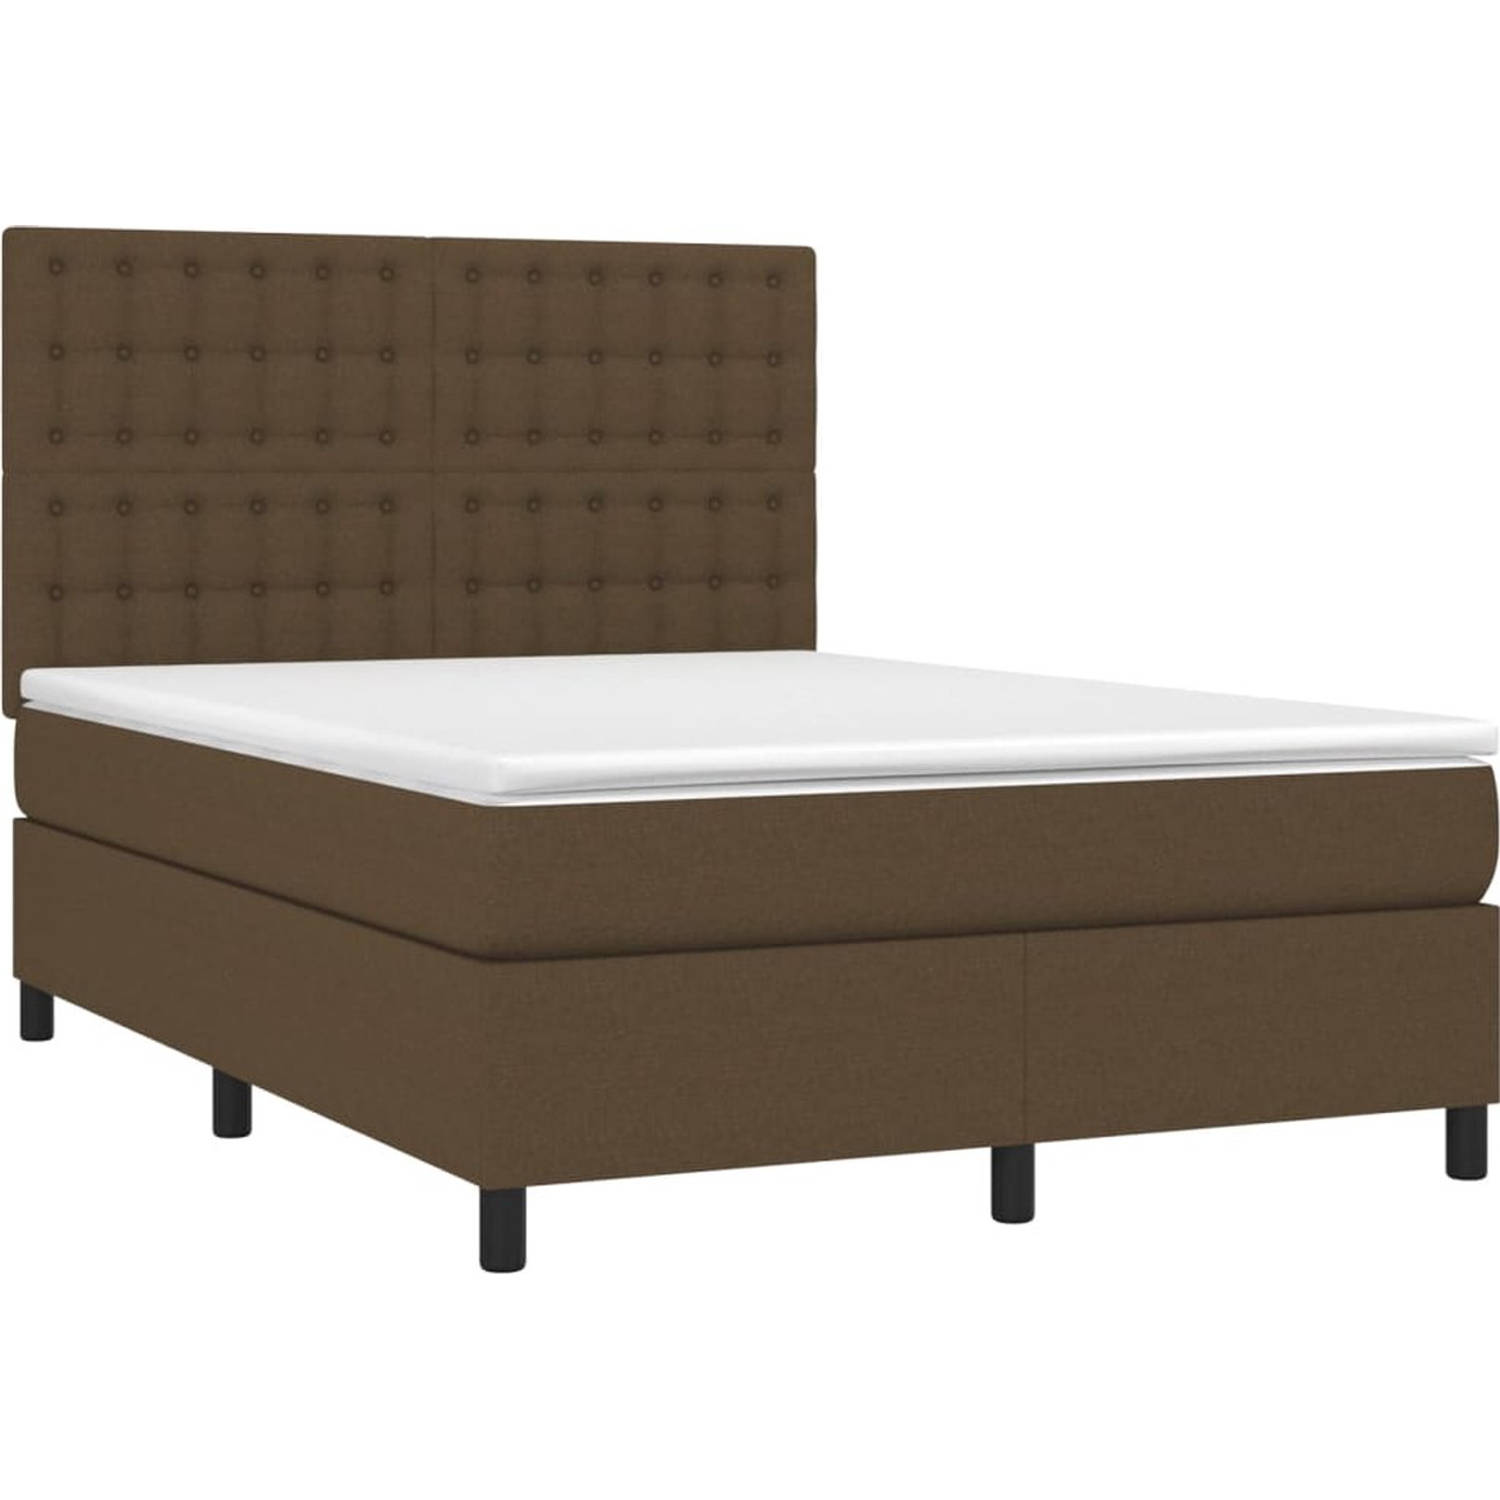 The Living Store Boxspring Dark Brown - 193x144 cm - Adjustable Headboard - Colorful LED Lighting - Pocket Spring Mattress - Skin-Friendly Topper - USB Connection